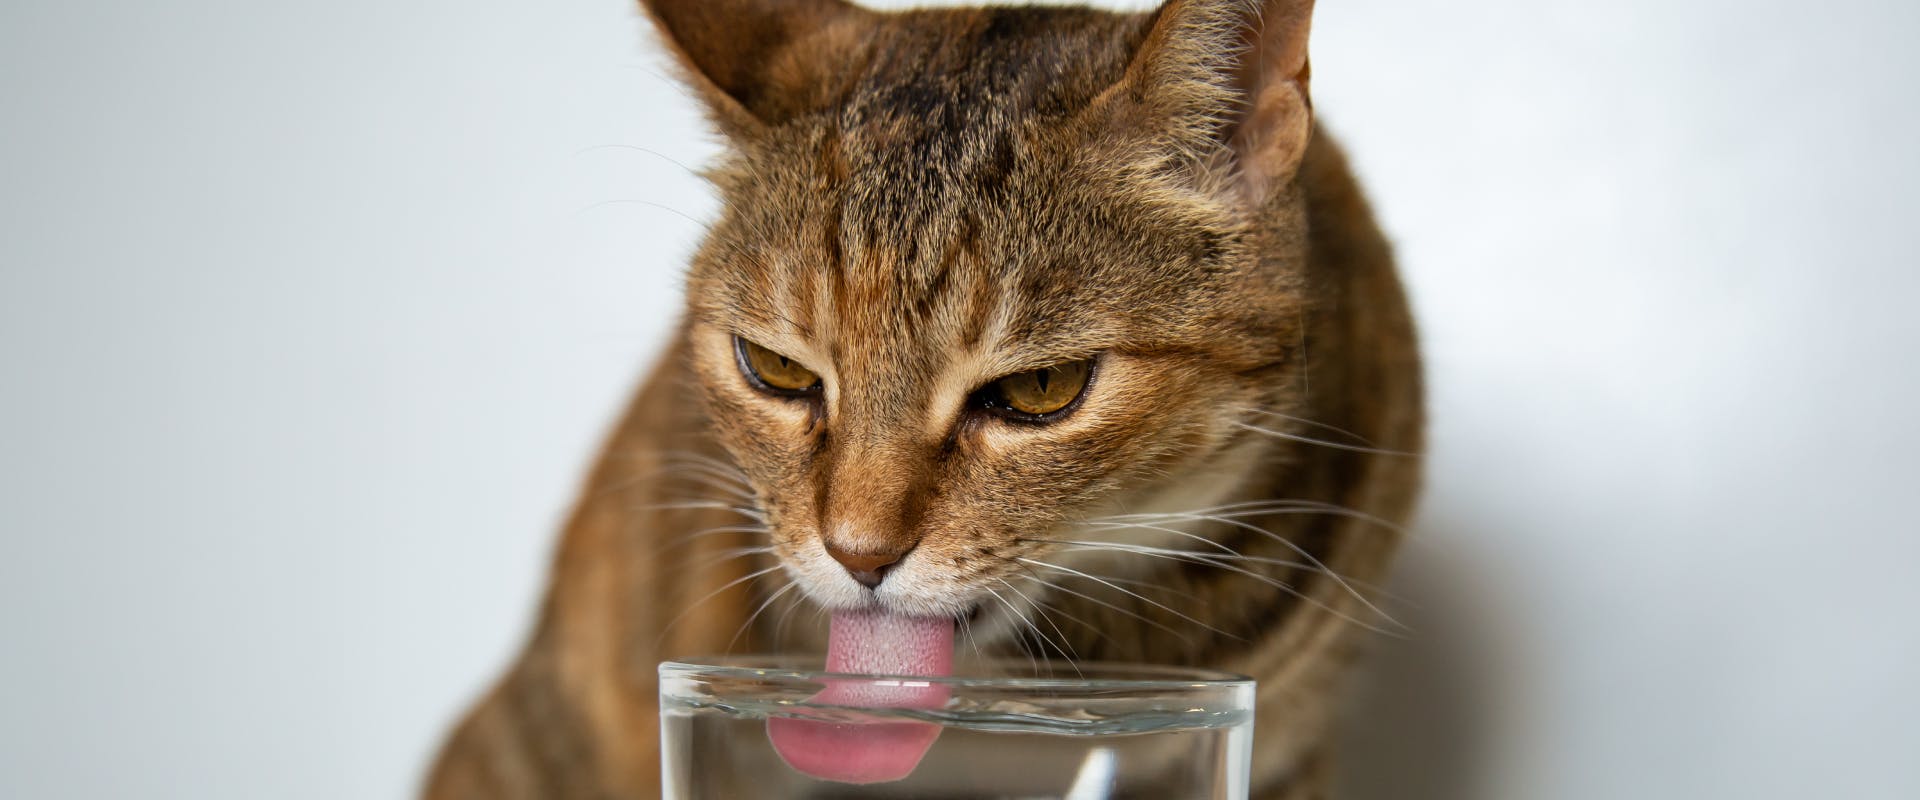 a short haired cat drinking out of a glass of water